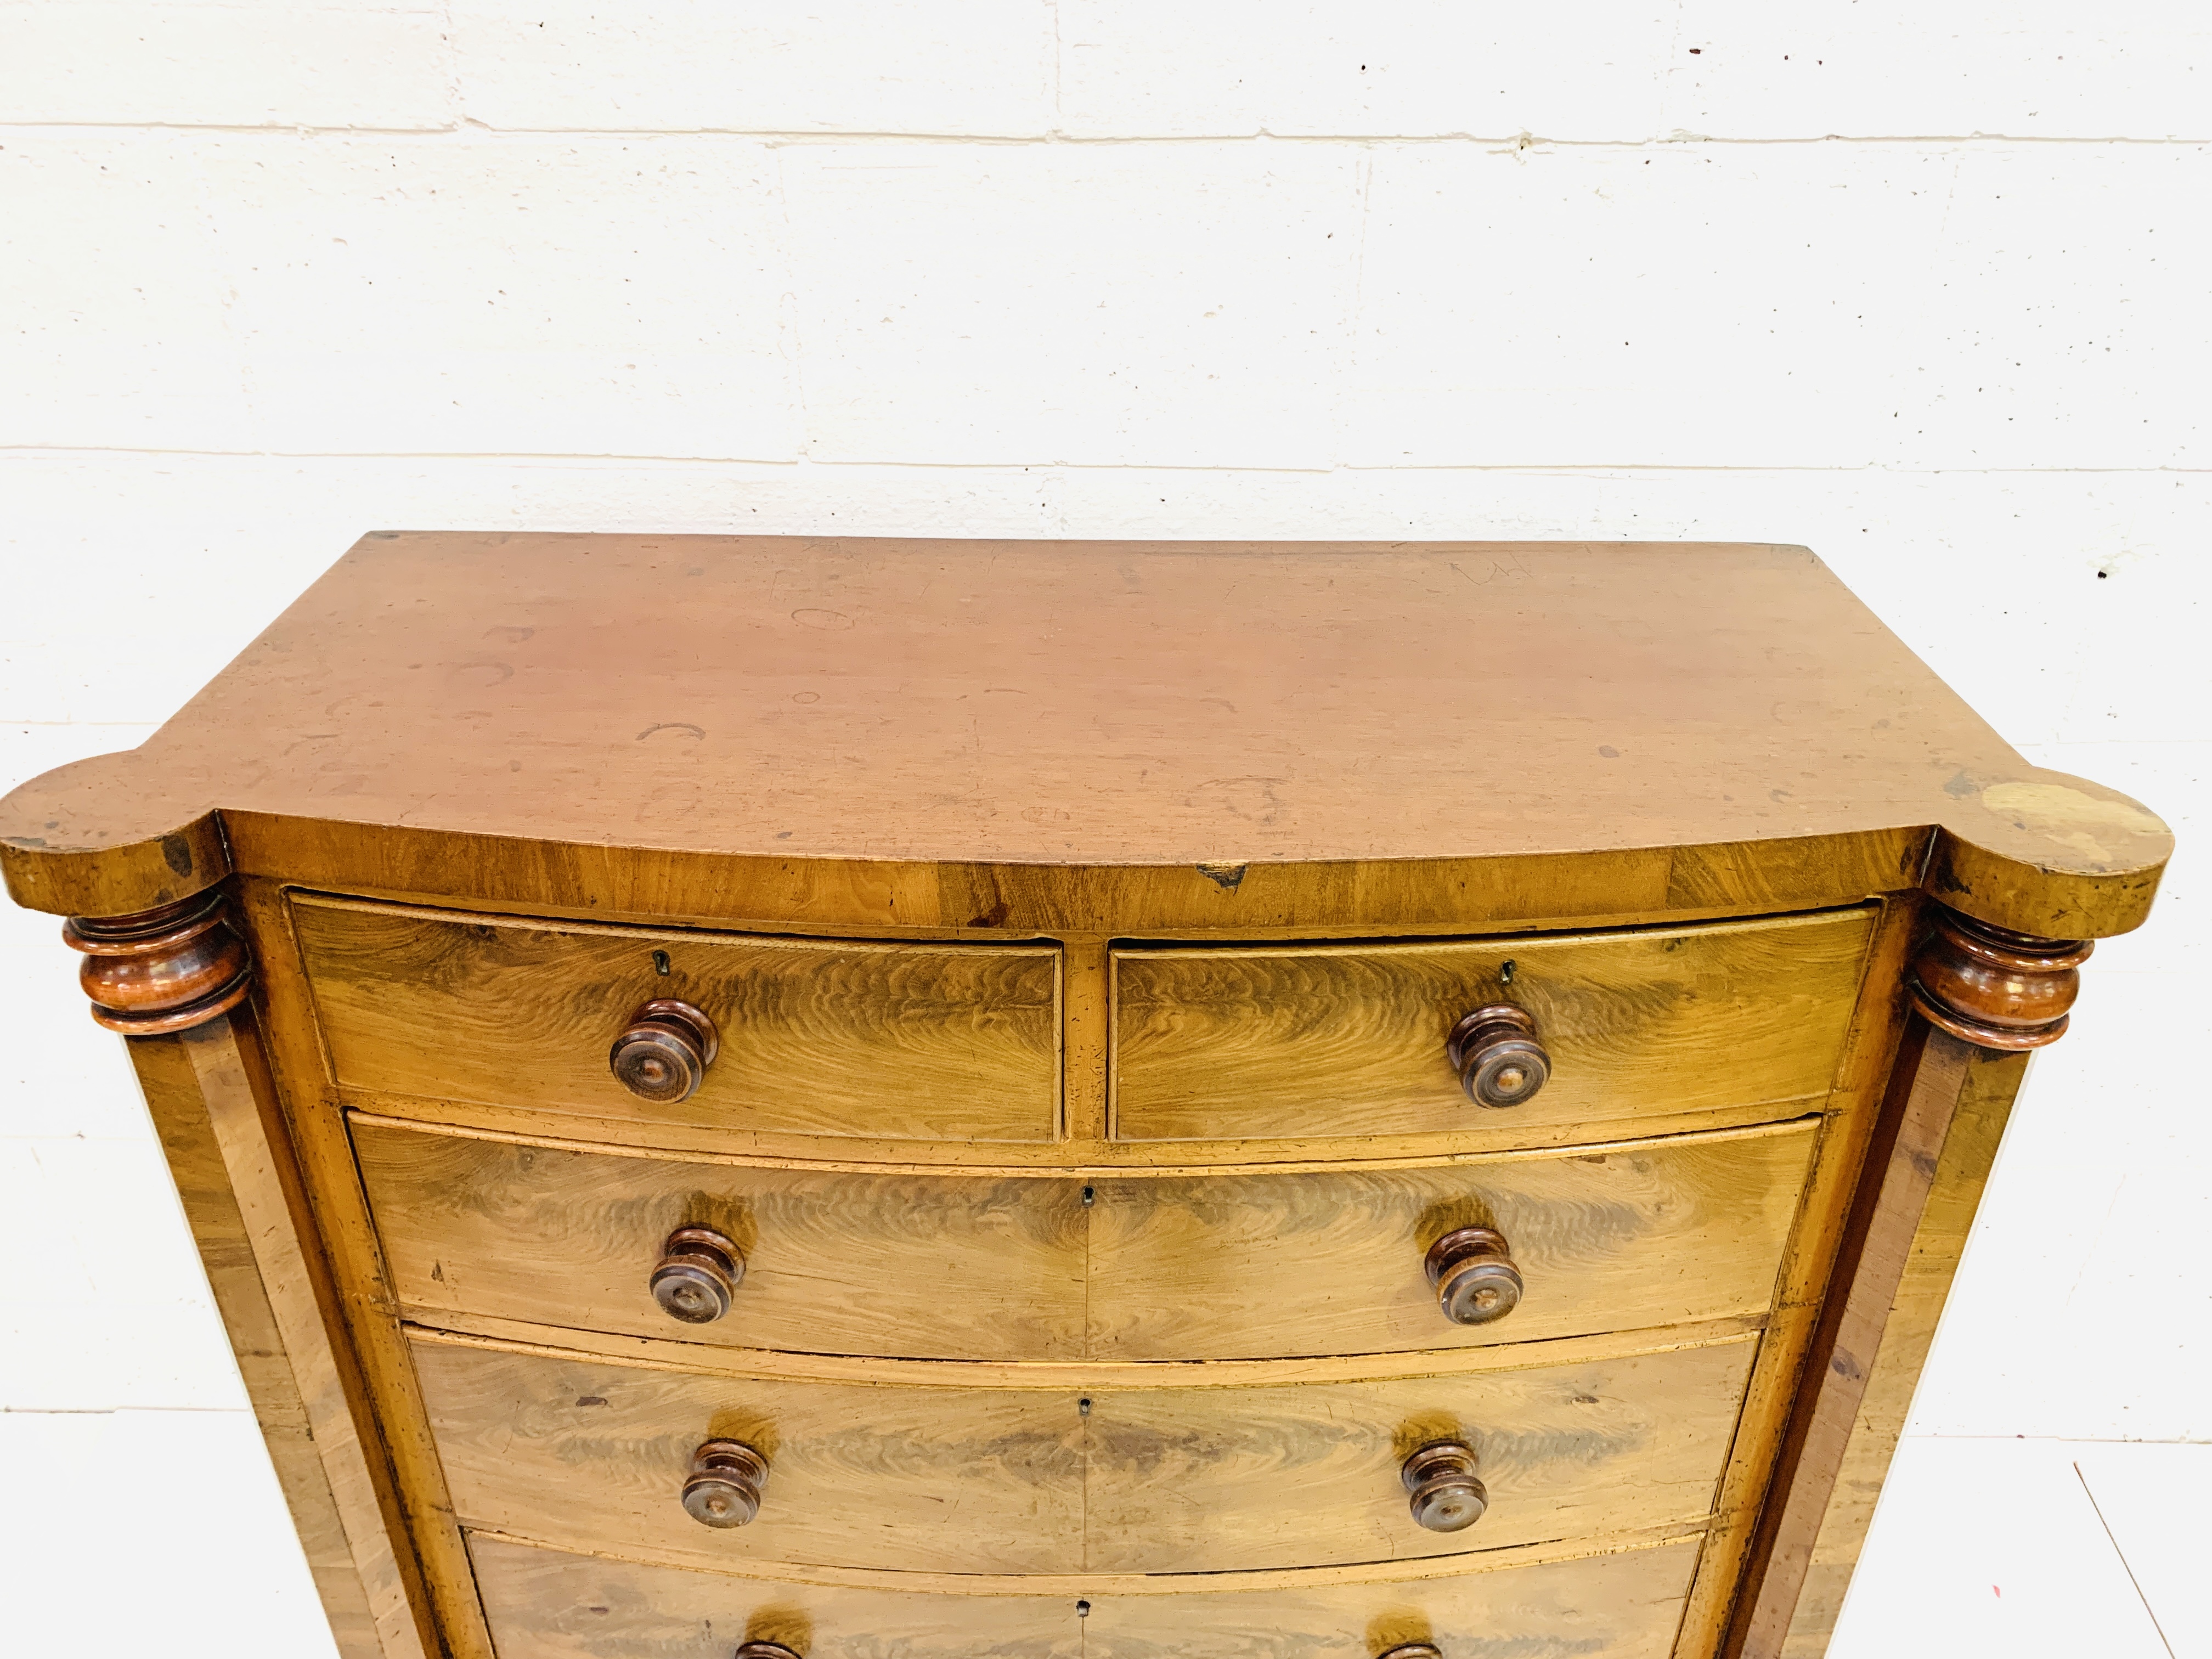 Victorian mahogany veneer Scotch chest of drawers - Image 7 of 8